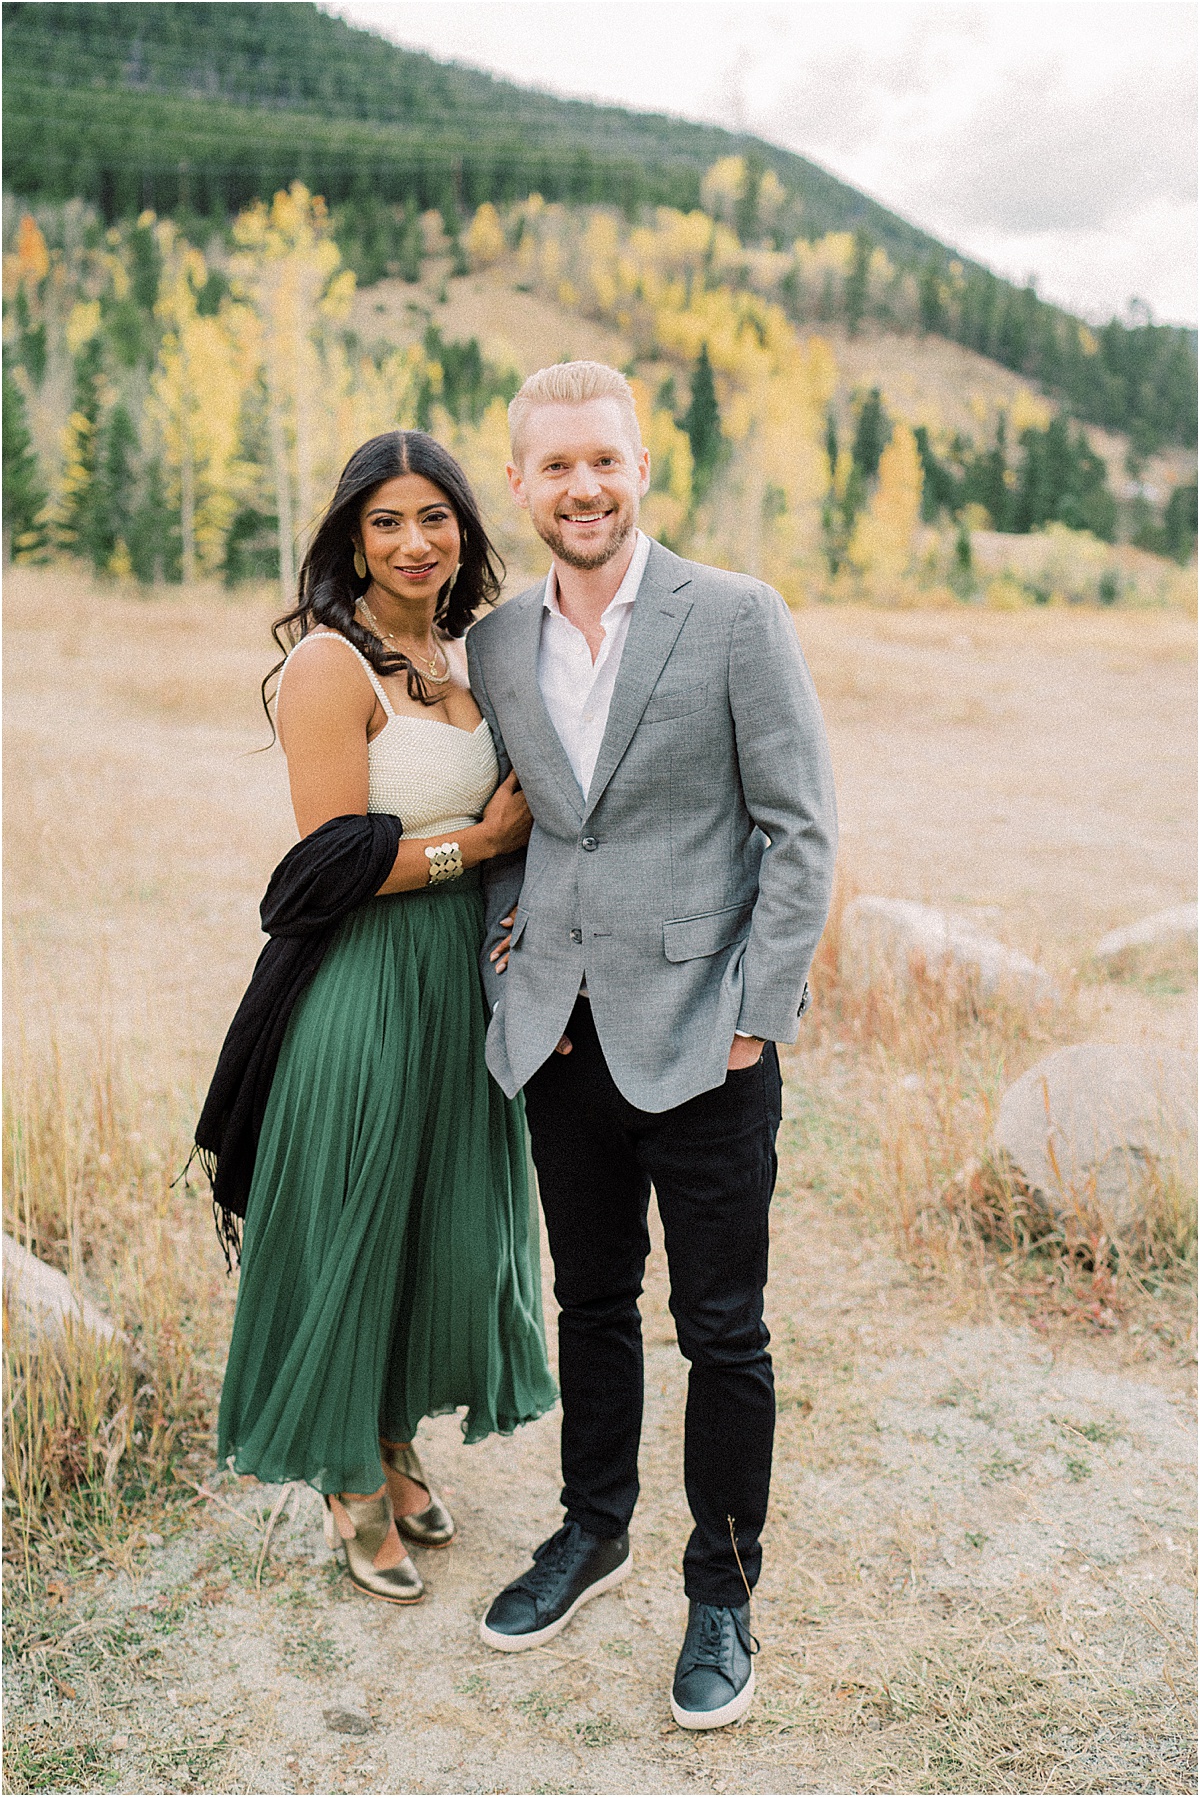 Colorado Mountain Engagement Shoot with Beautiful View © Bonnie Sen Photography